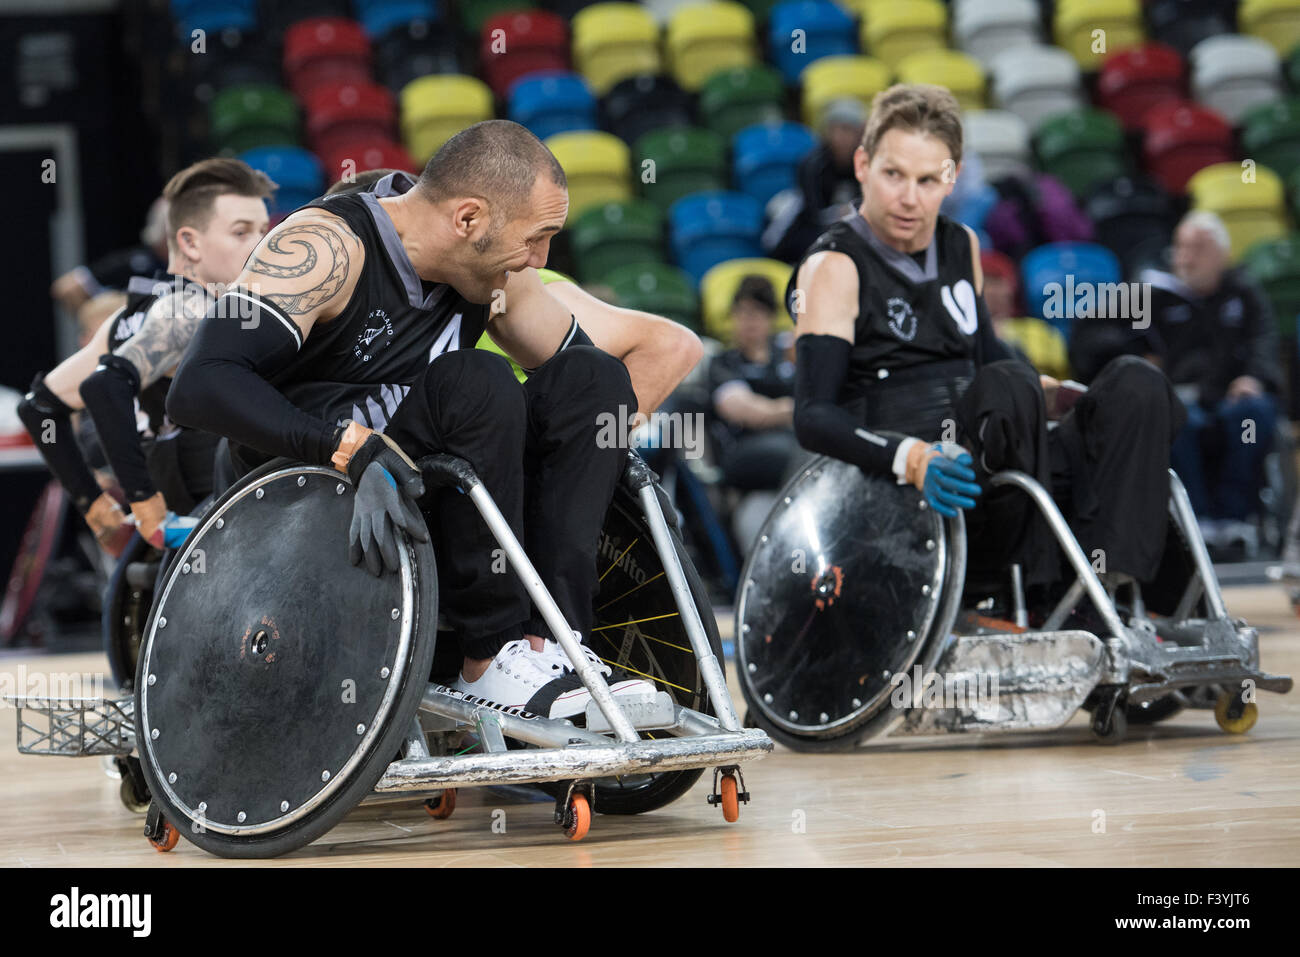 World Wheelchair Rugby Challenge 2015 RSA vs NZL. New Zealand 'Wheel Blacks' defeat South Africa 64-32. New Zealand no 4 Sholto Taylor 13th October, 2015. copyright PMGimaging/Alamy Live News Stock Photo